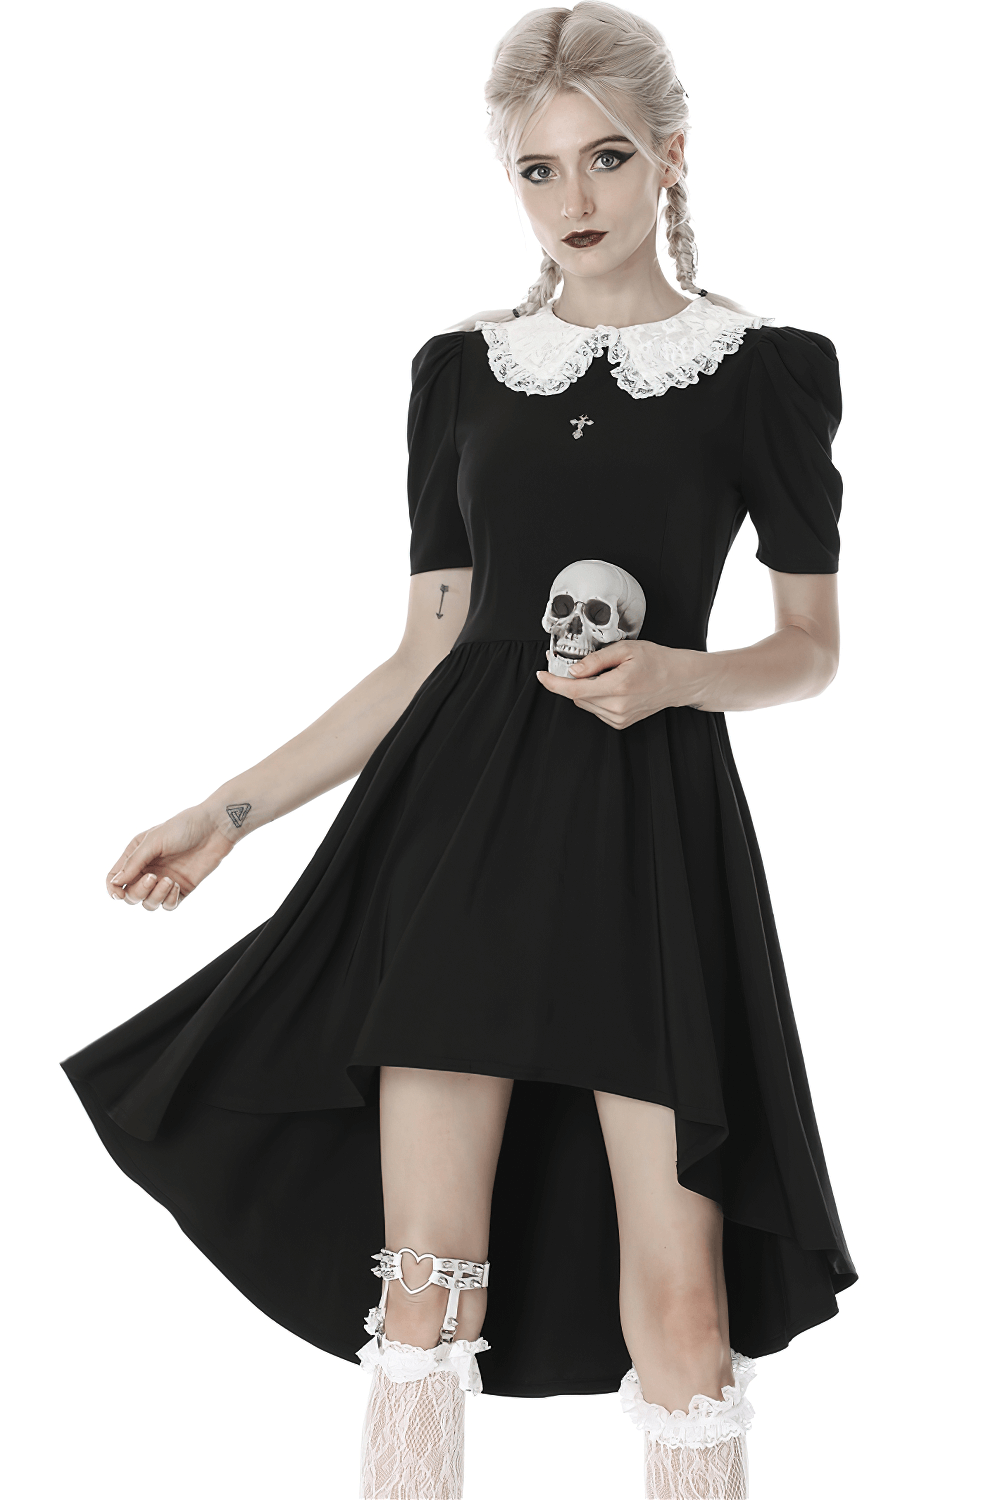 Chic Lolita Flare Dress with White Collar and Cross Pendant